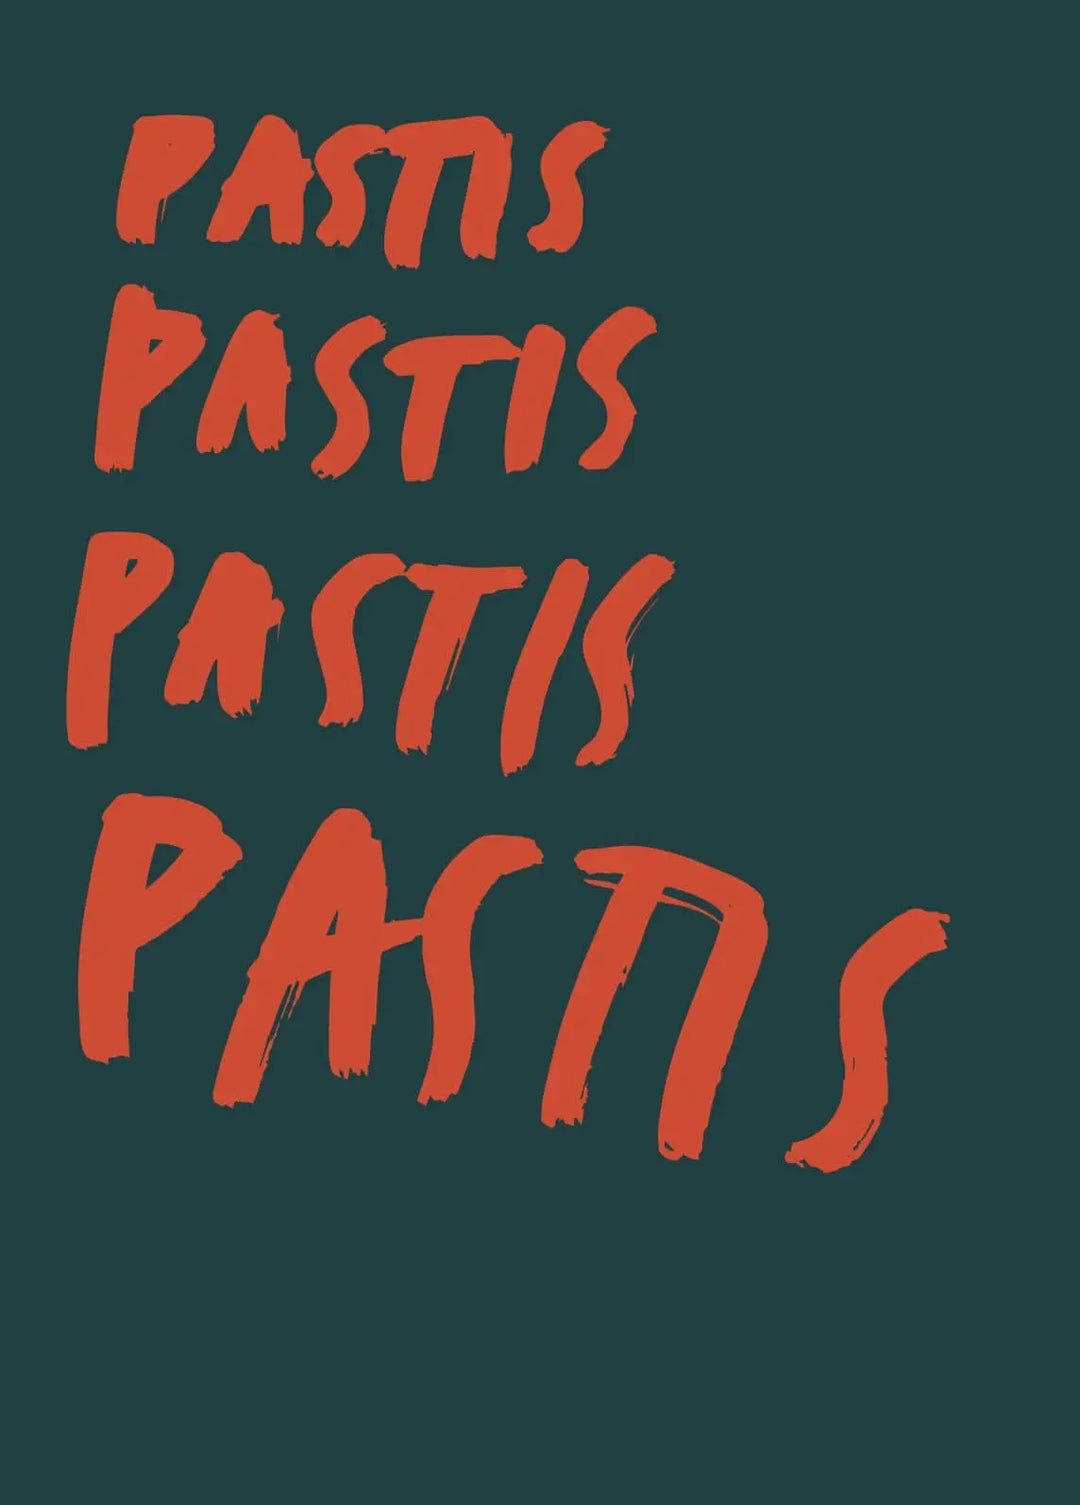 New Mags - Pastis New Mags